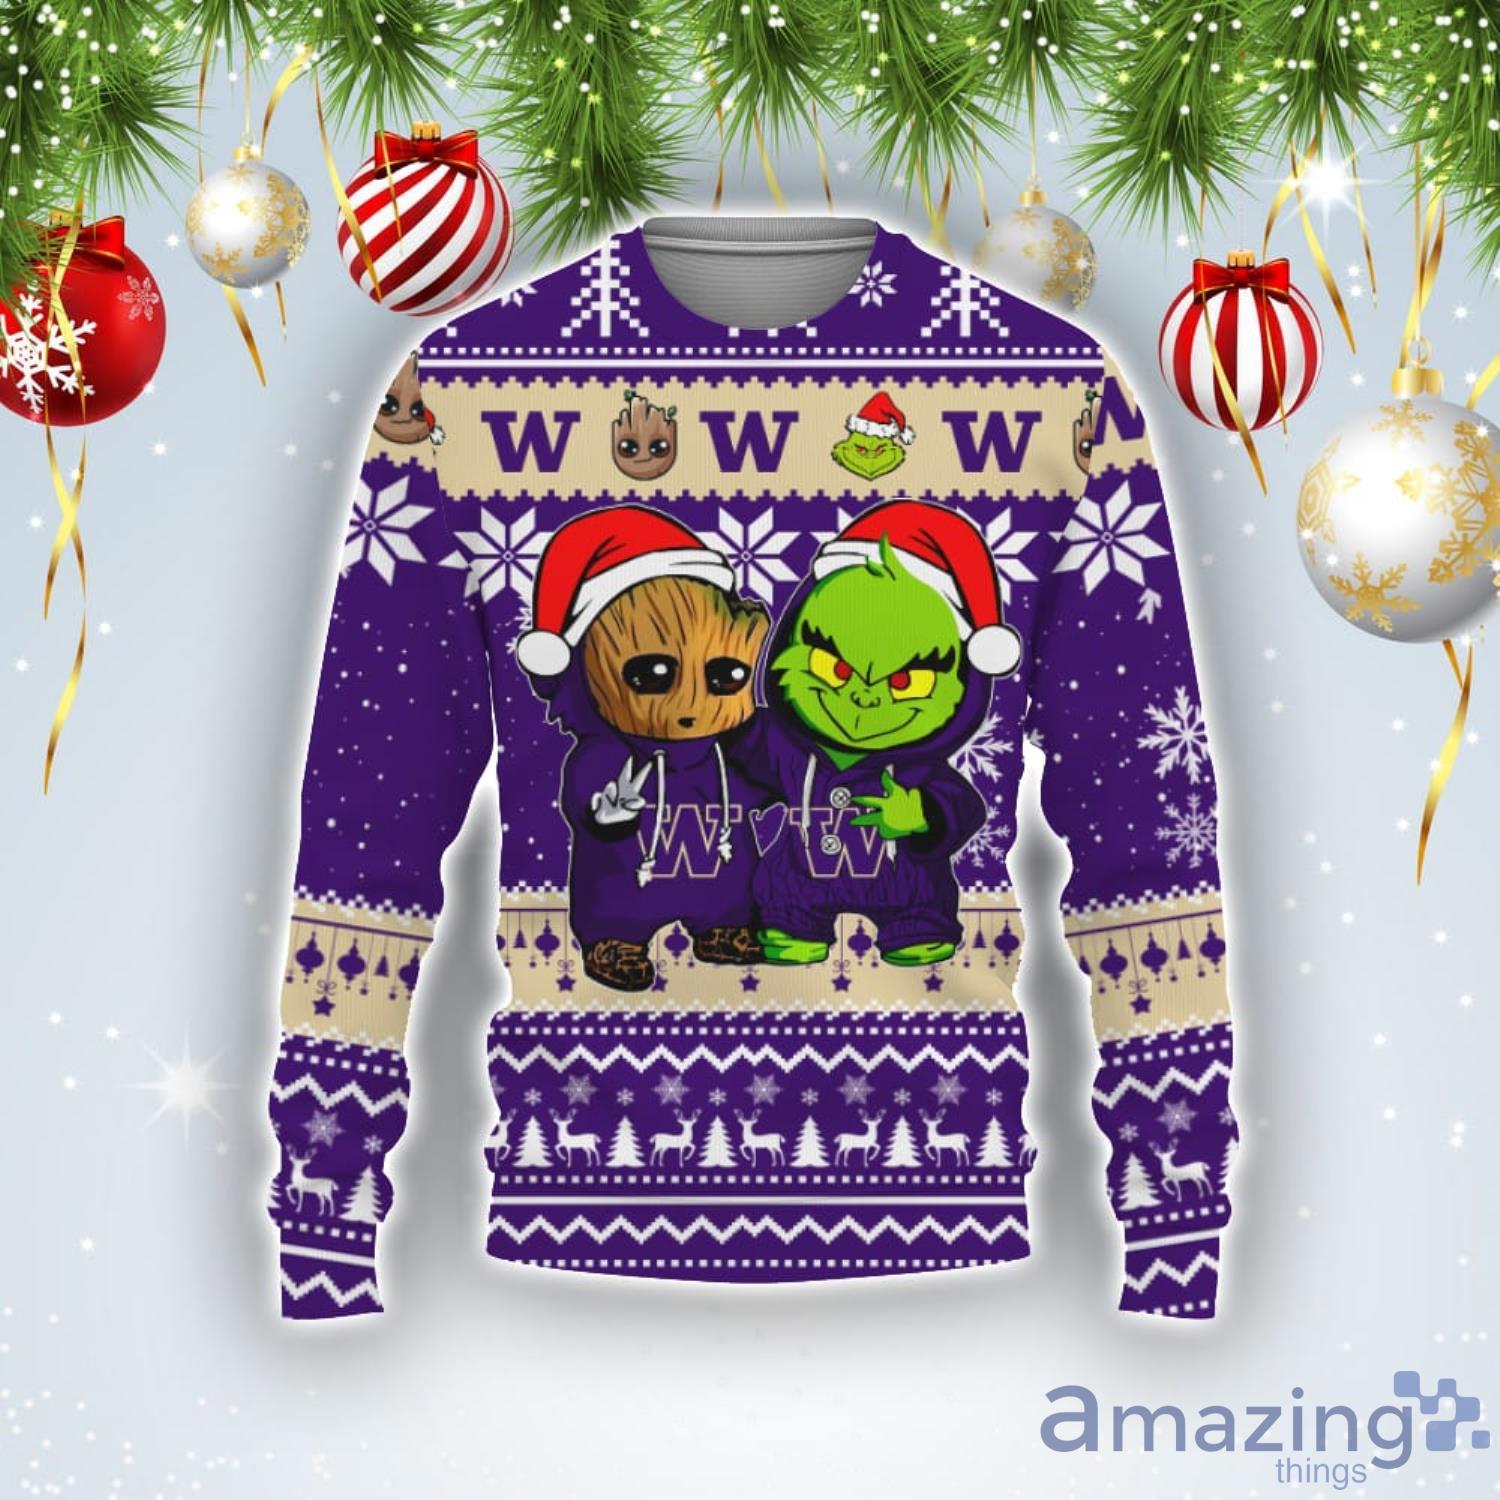 Washington Wizards Baby Groot And Grinch NBA Ugly Christmas Sweater -  Tagotee